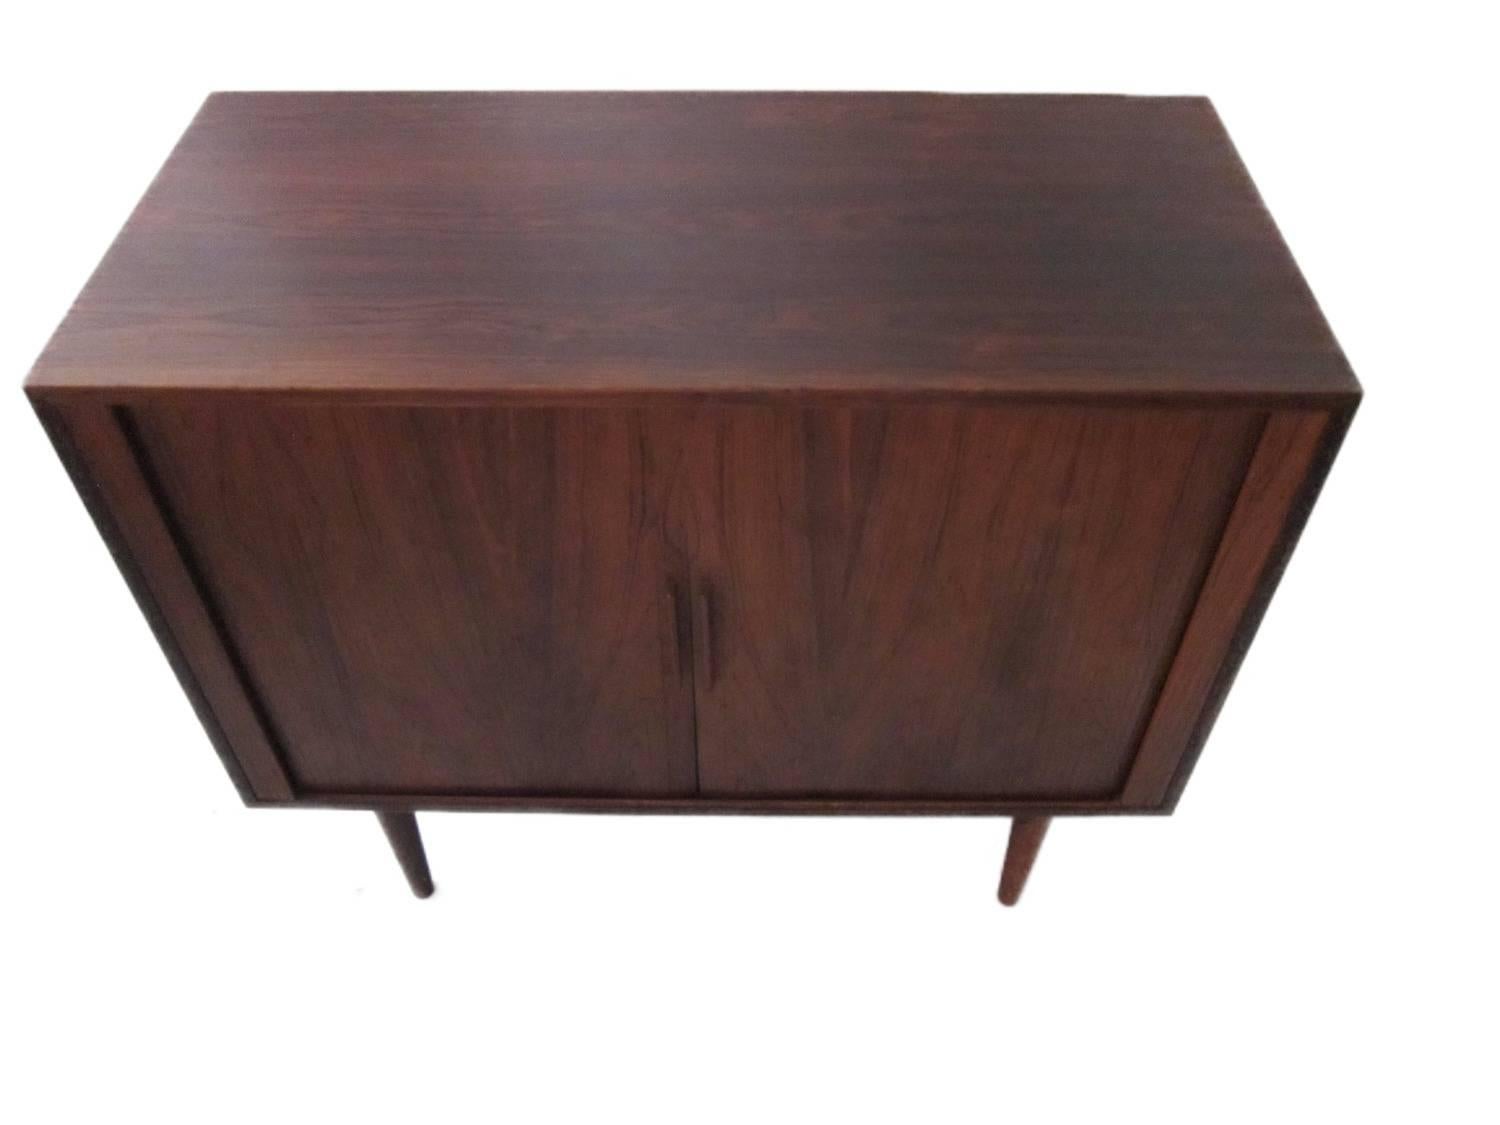 Small Danish sideboard in rosewood with sliding doors and shelves inside designed by Kai Kristiansen. It has tapered legs in solid rosewood as well and a stunning shape.

It is refurnished and comes in excellent vintage condition.
 